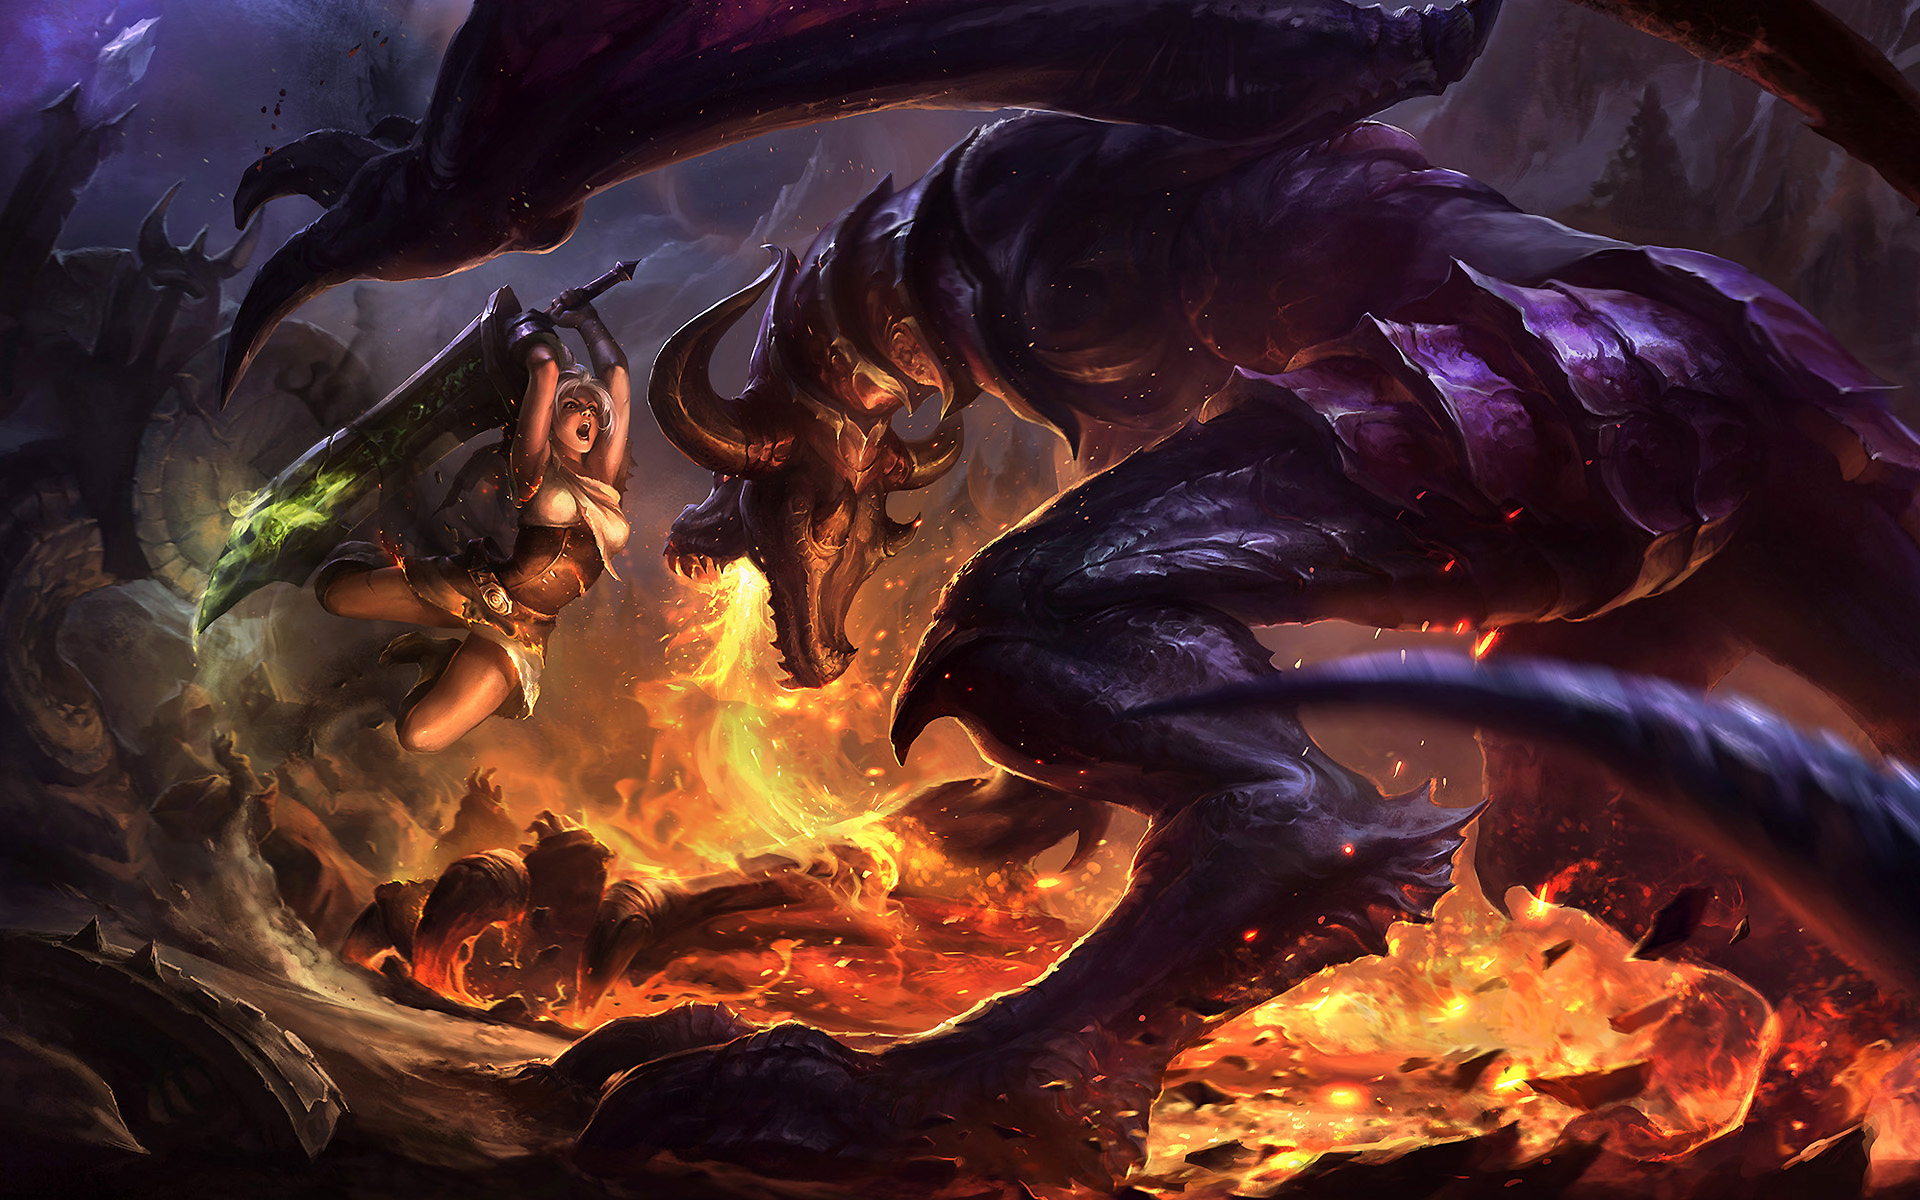 Riven fighting the dragon